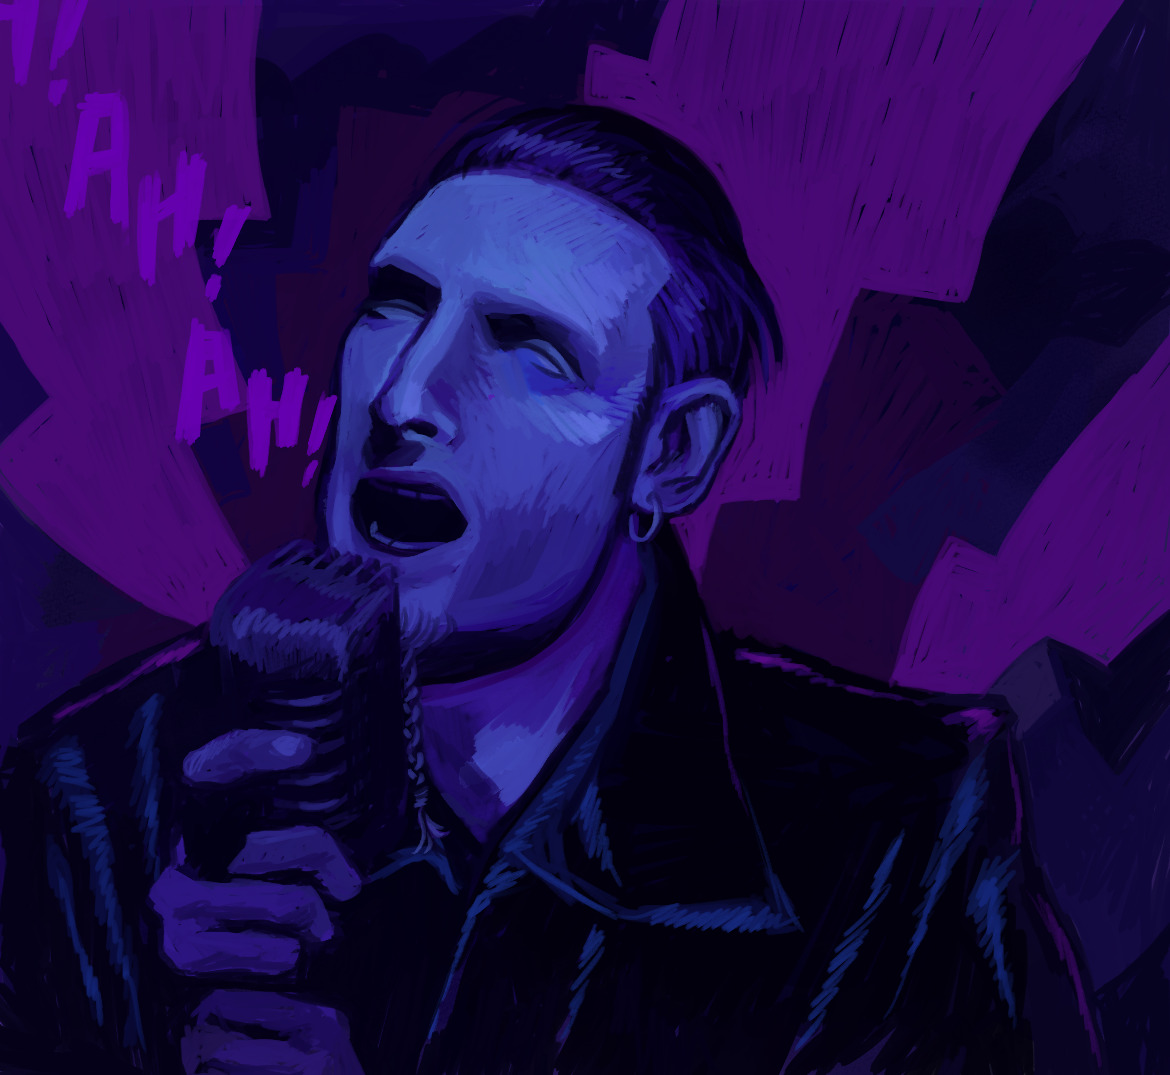 Digital monochrome blue drawing of Lane Staley from the Them Bones music video. He is yelling into a microphone